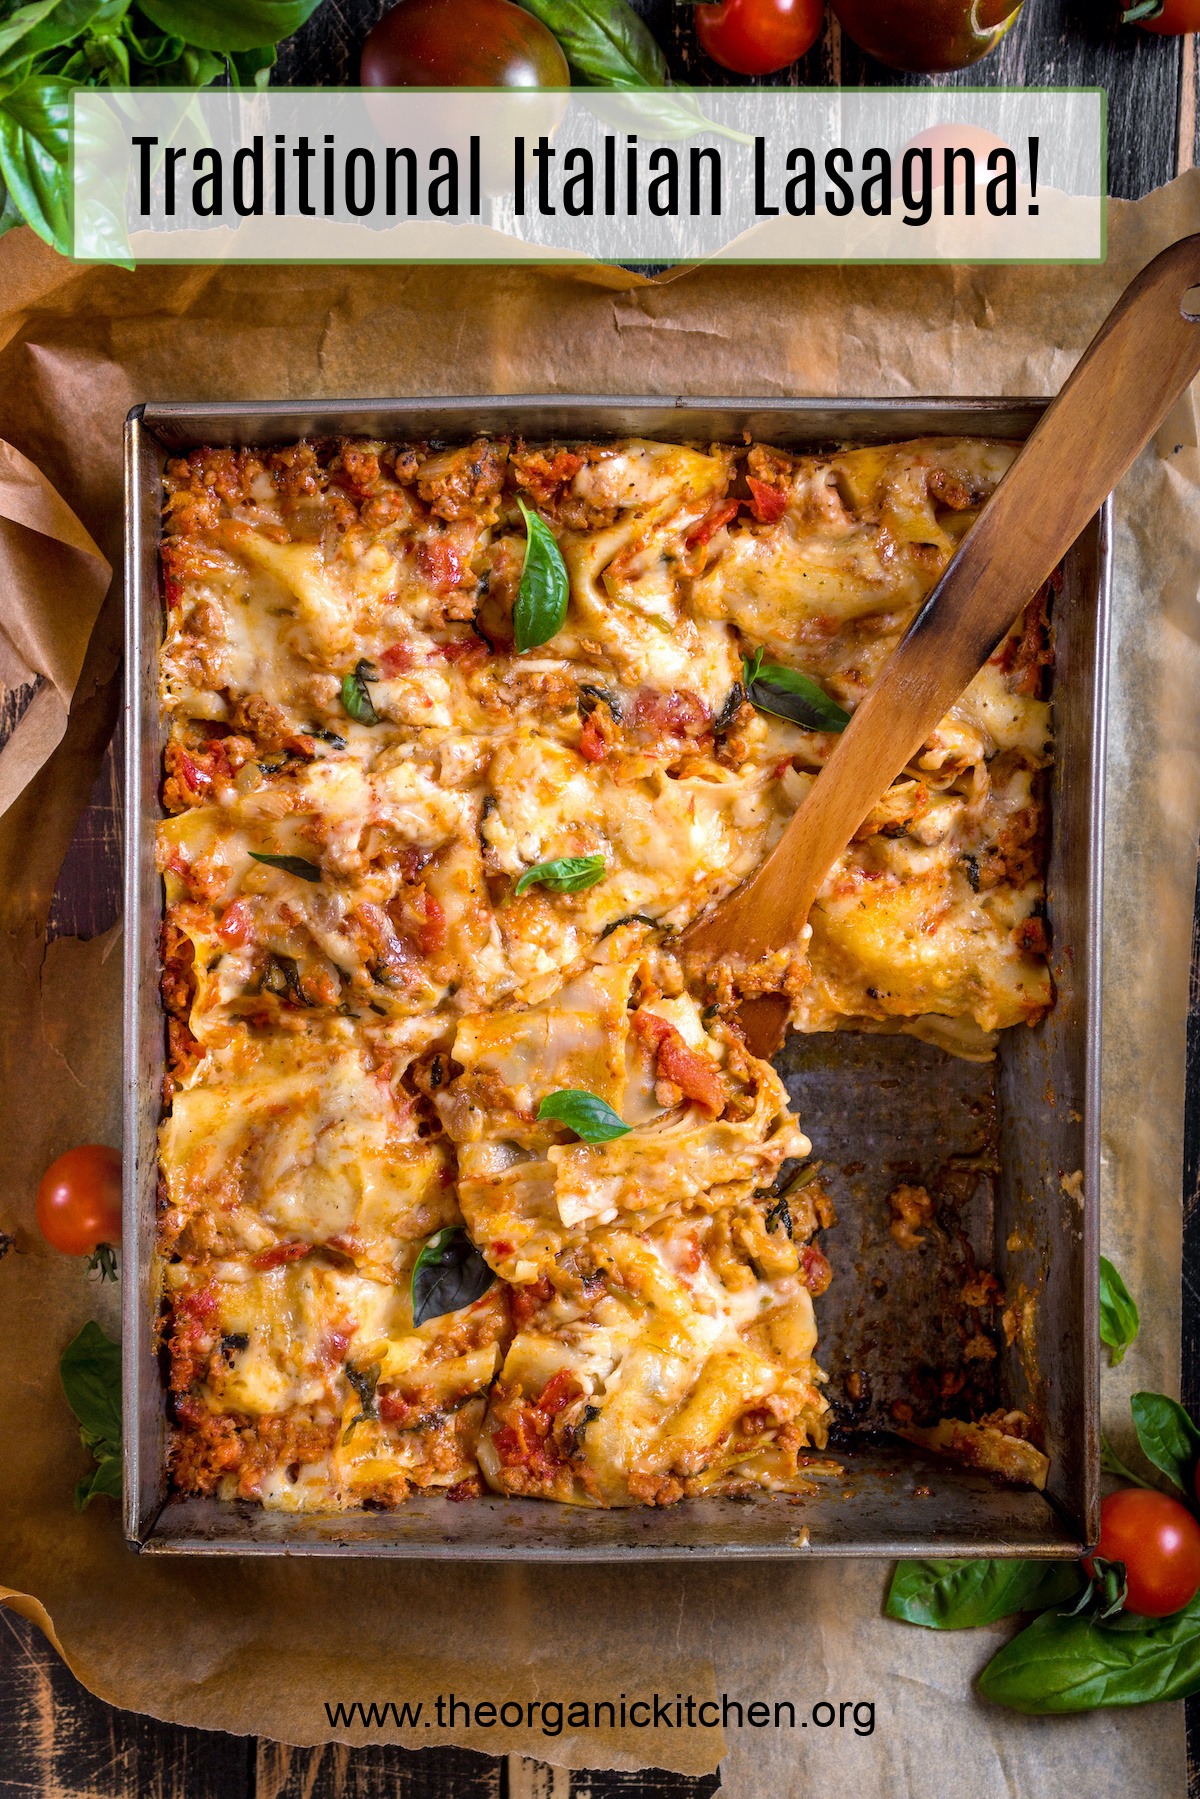 Traditional Italian Lasagna topped with basil leaves served on a rustic dark wooden table